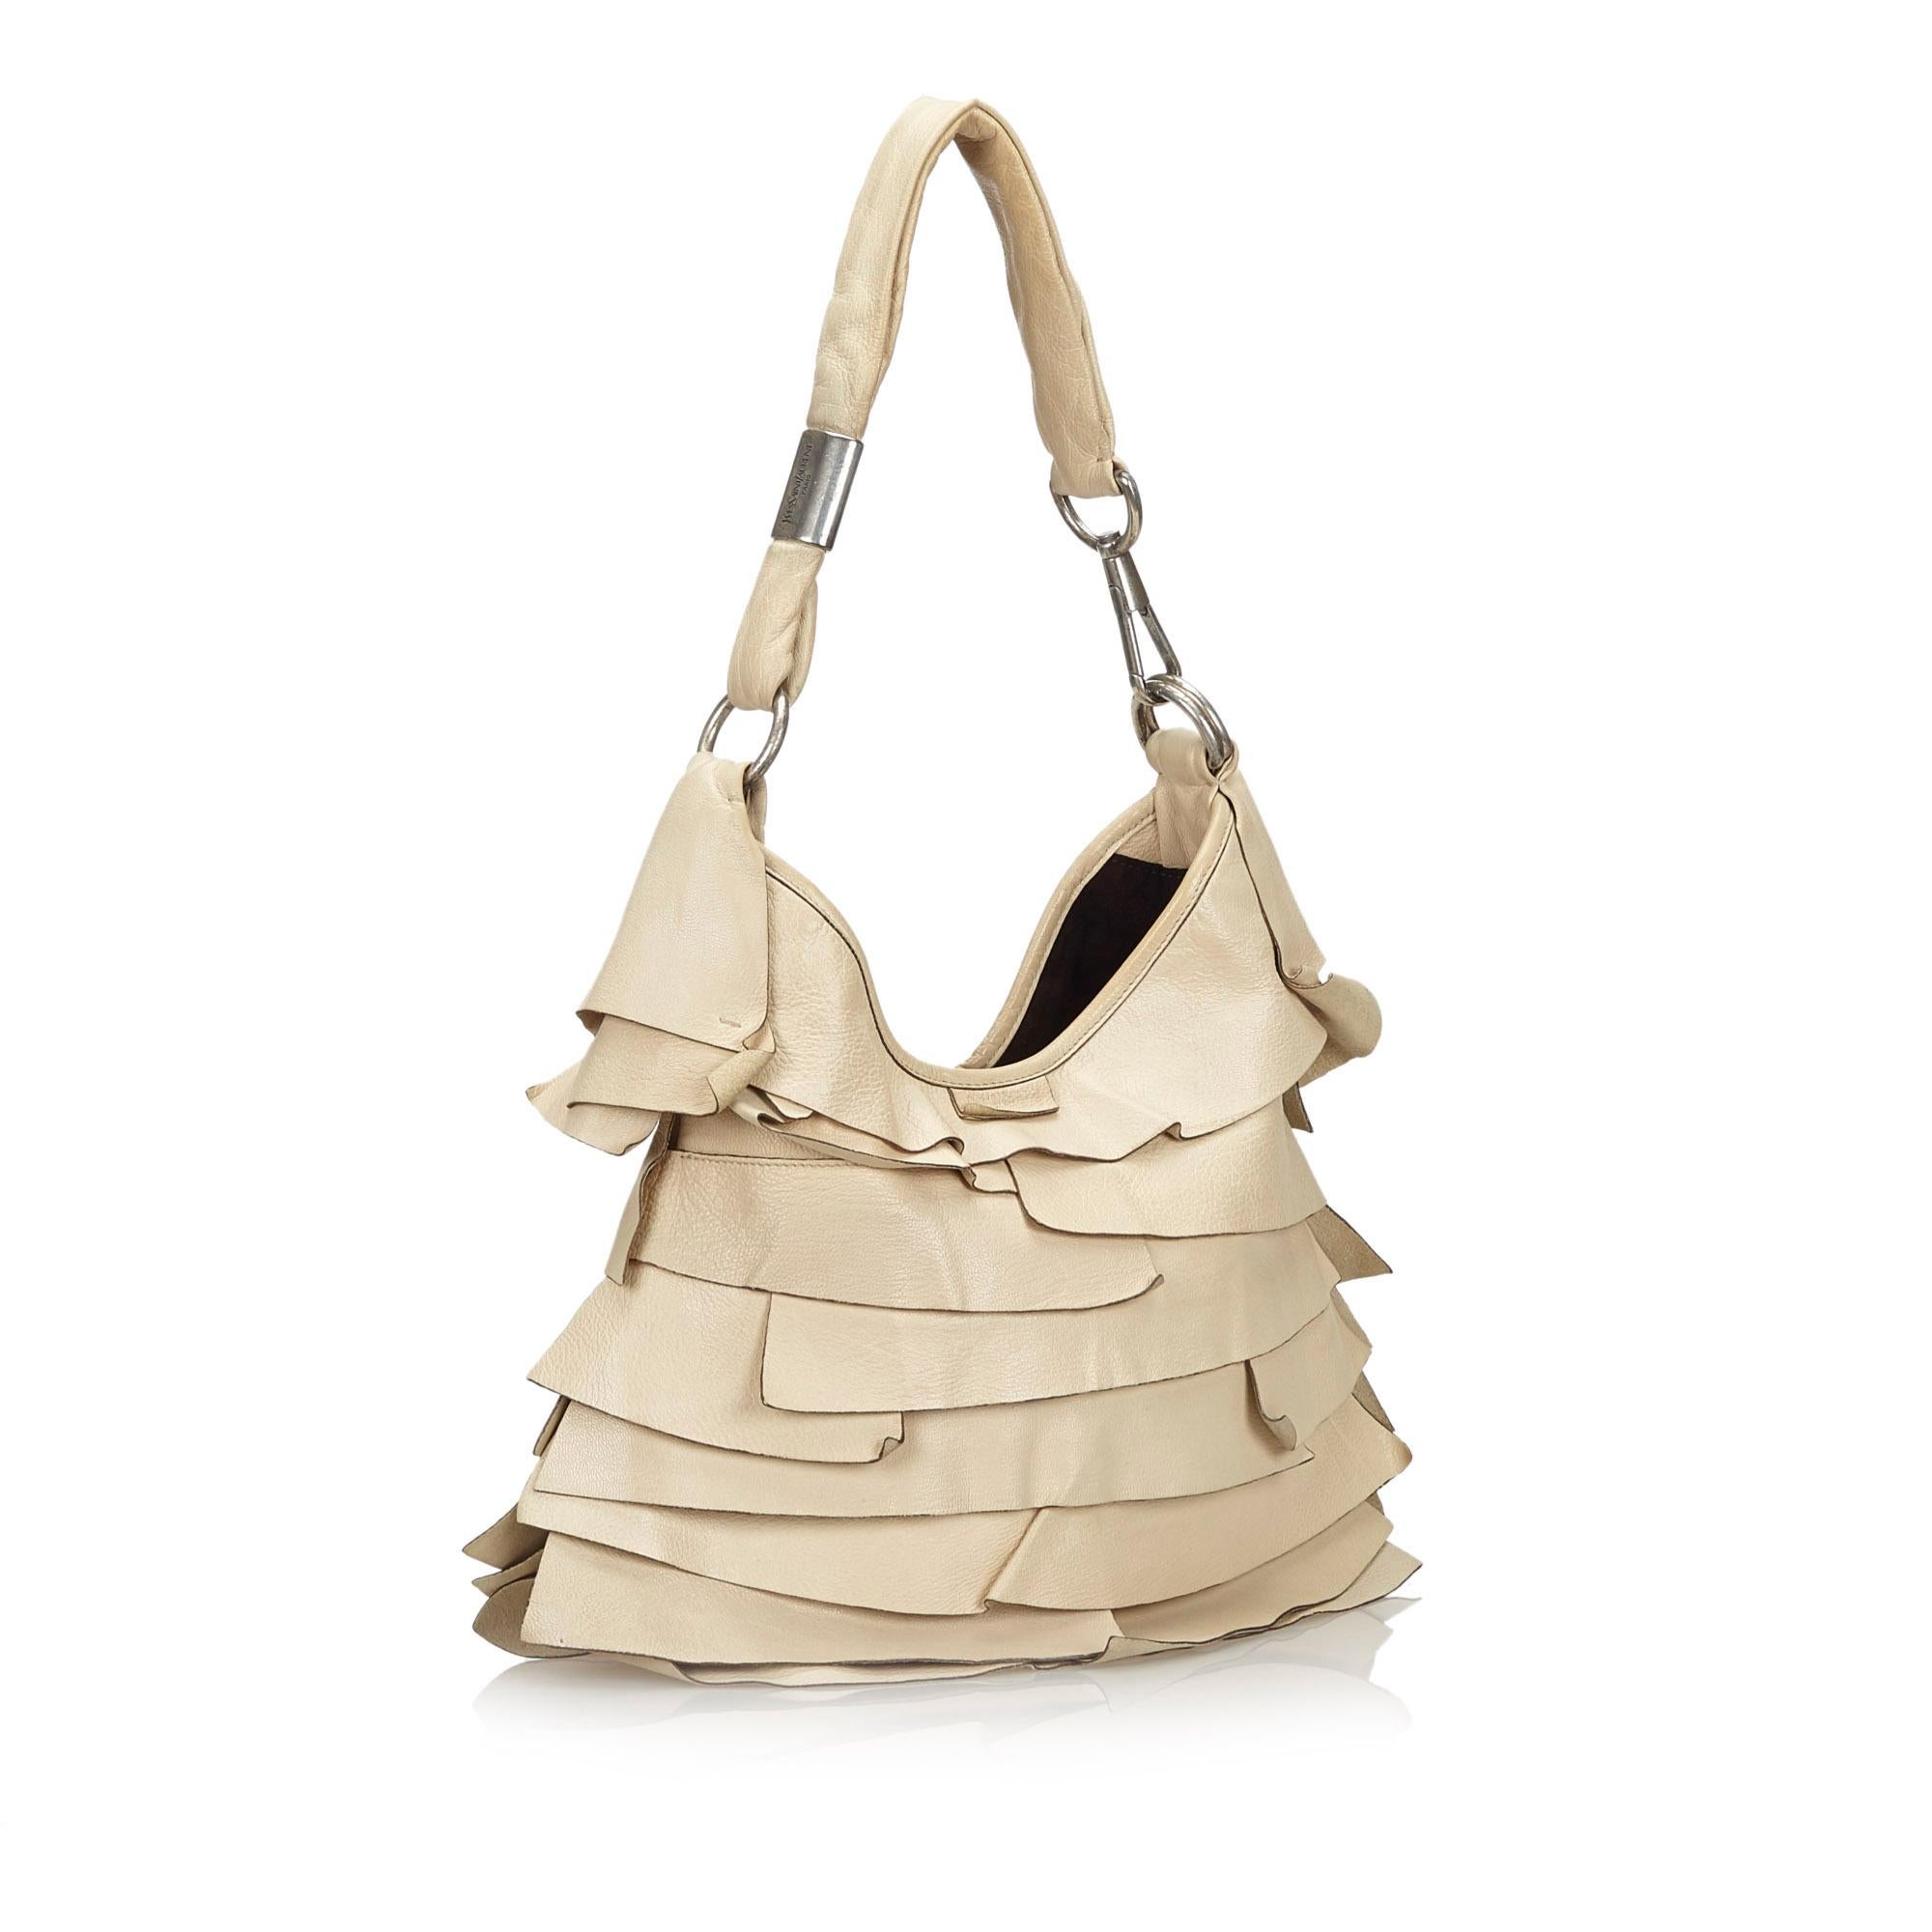 The Saint Tropez features a ruffled leather body, a leather strap, a top magnetic closure, and interior zip and slip pockets. It carries as B+ condition rating.

Inclusions: 
This item does not come with inclusions.

Dimensions:
Length: 24.00